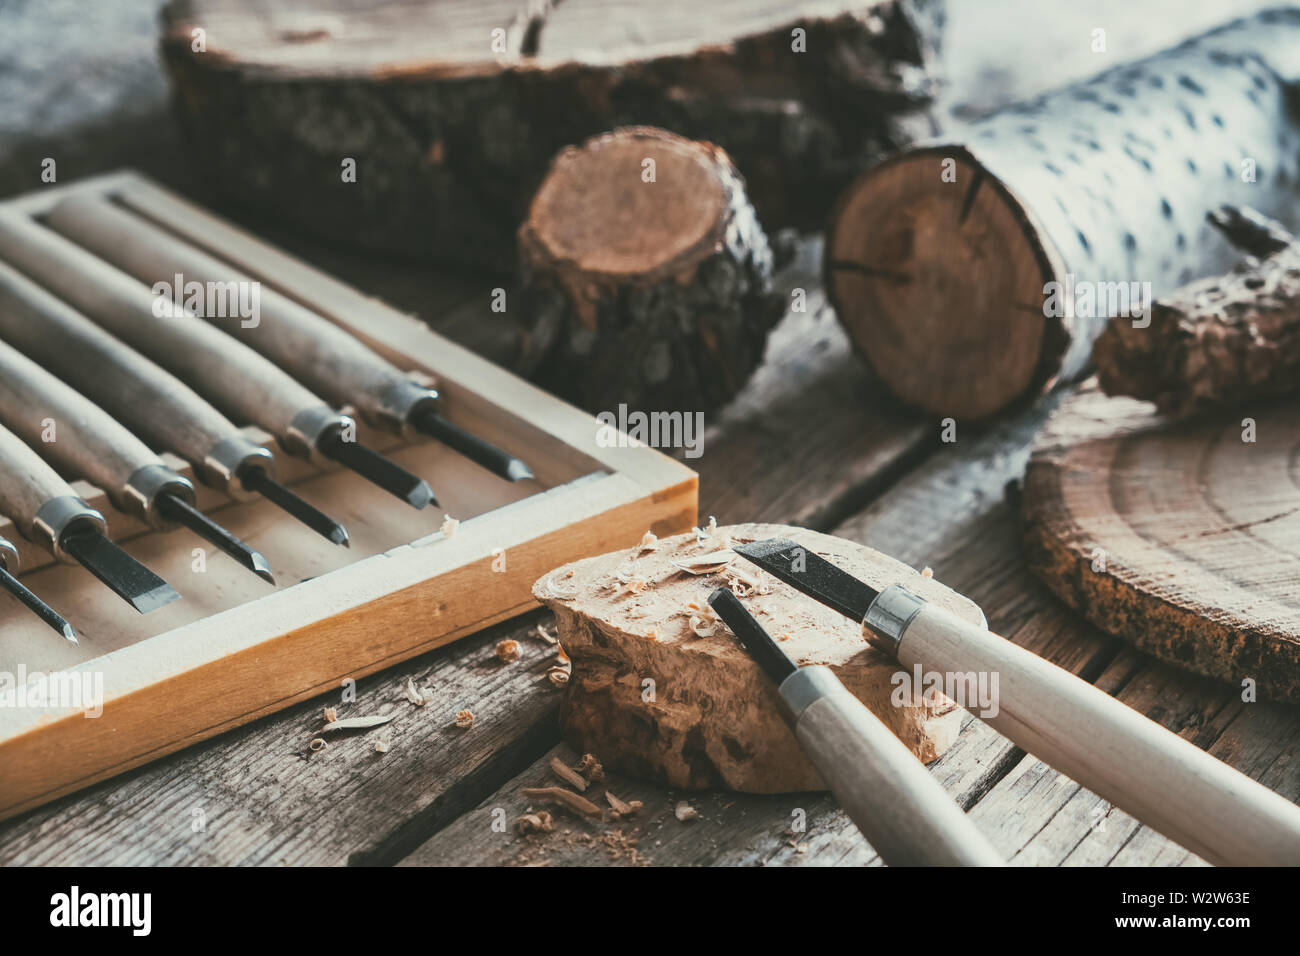 Set of woodworking tools for wood carving and trees cuts on wooden workbench. Stock Photo